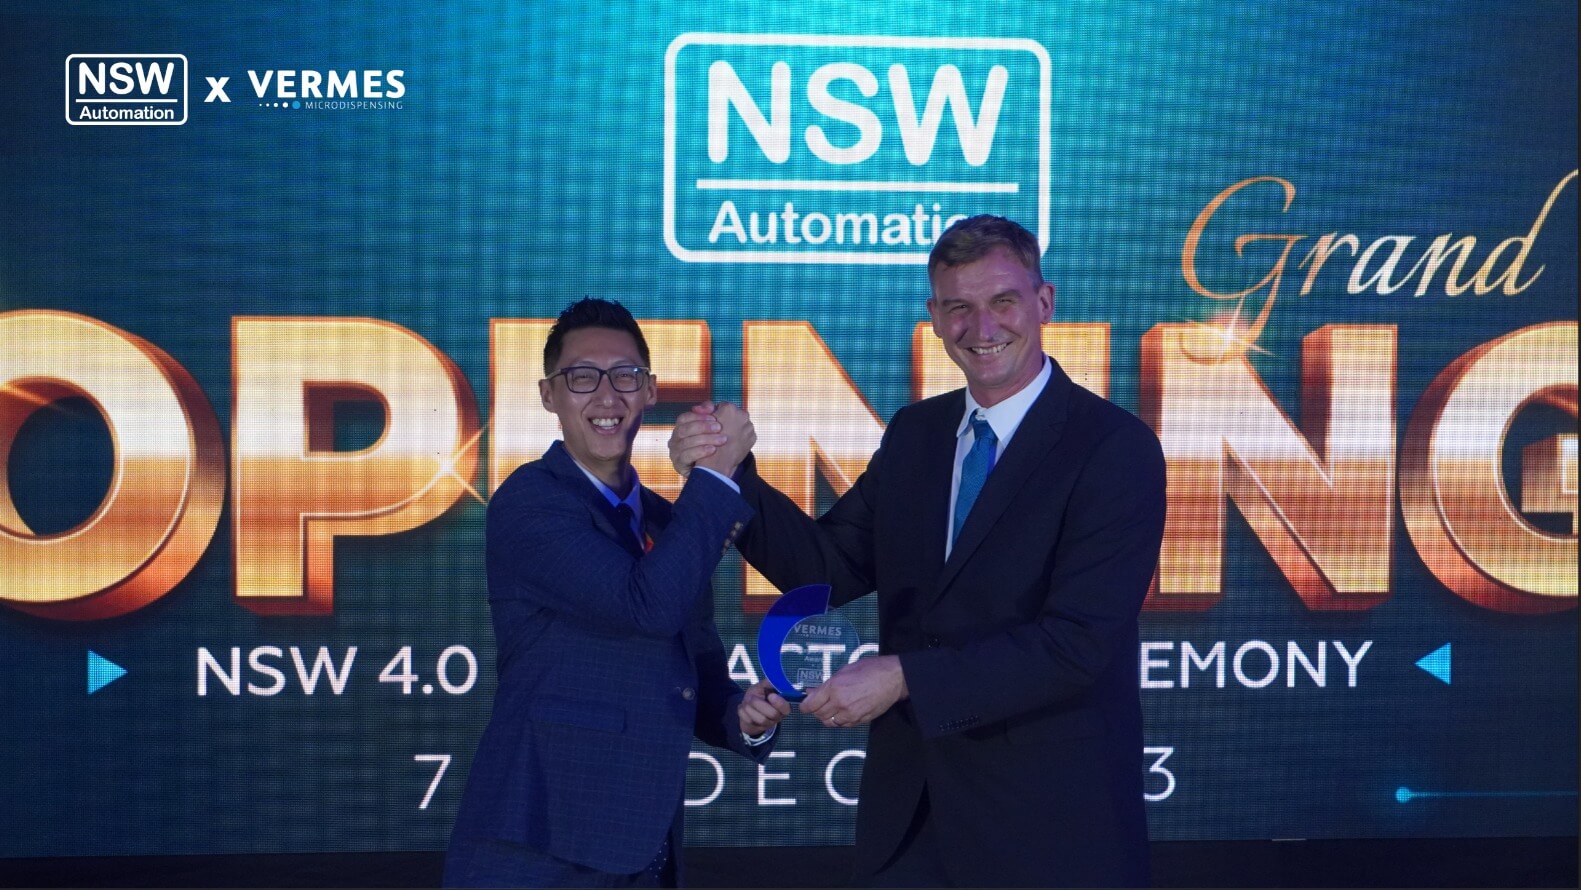 Vermes Awarded NSW Automation